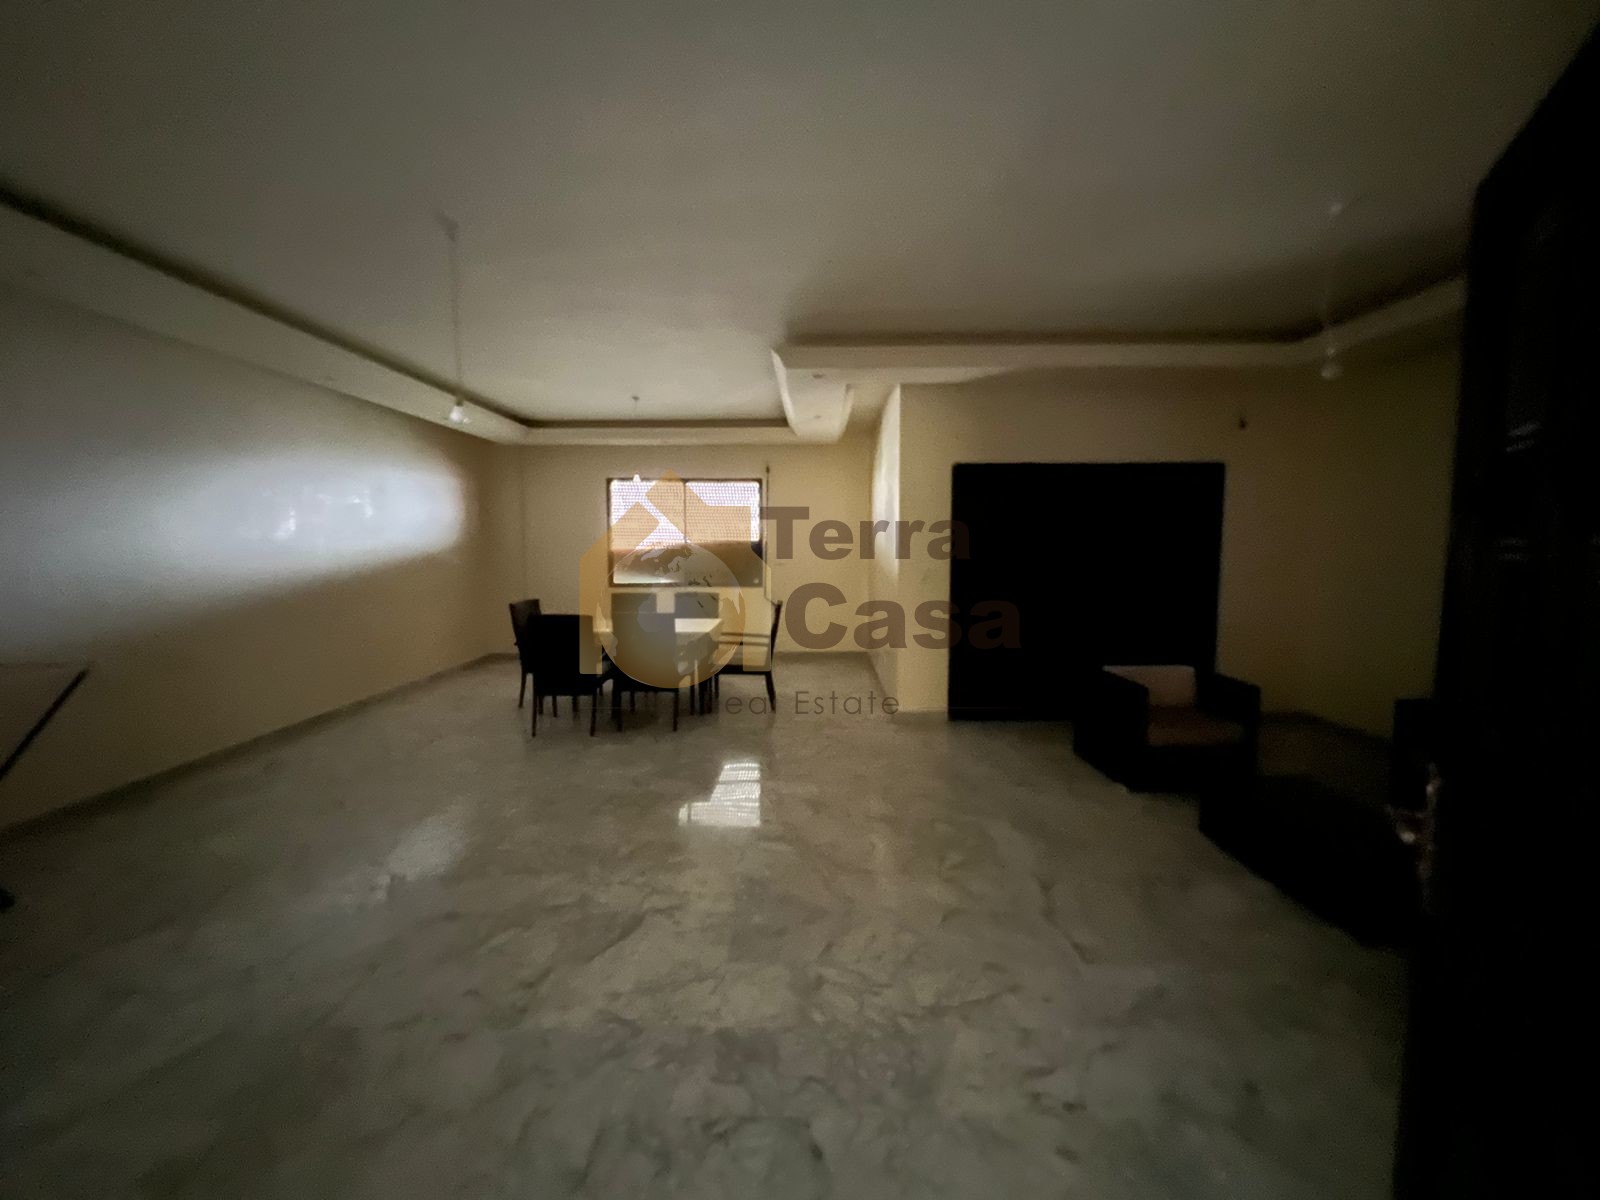 Aoukar fully decorated apartment open view